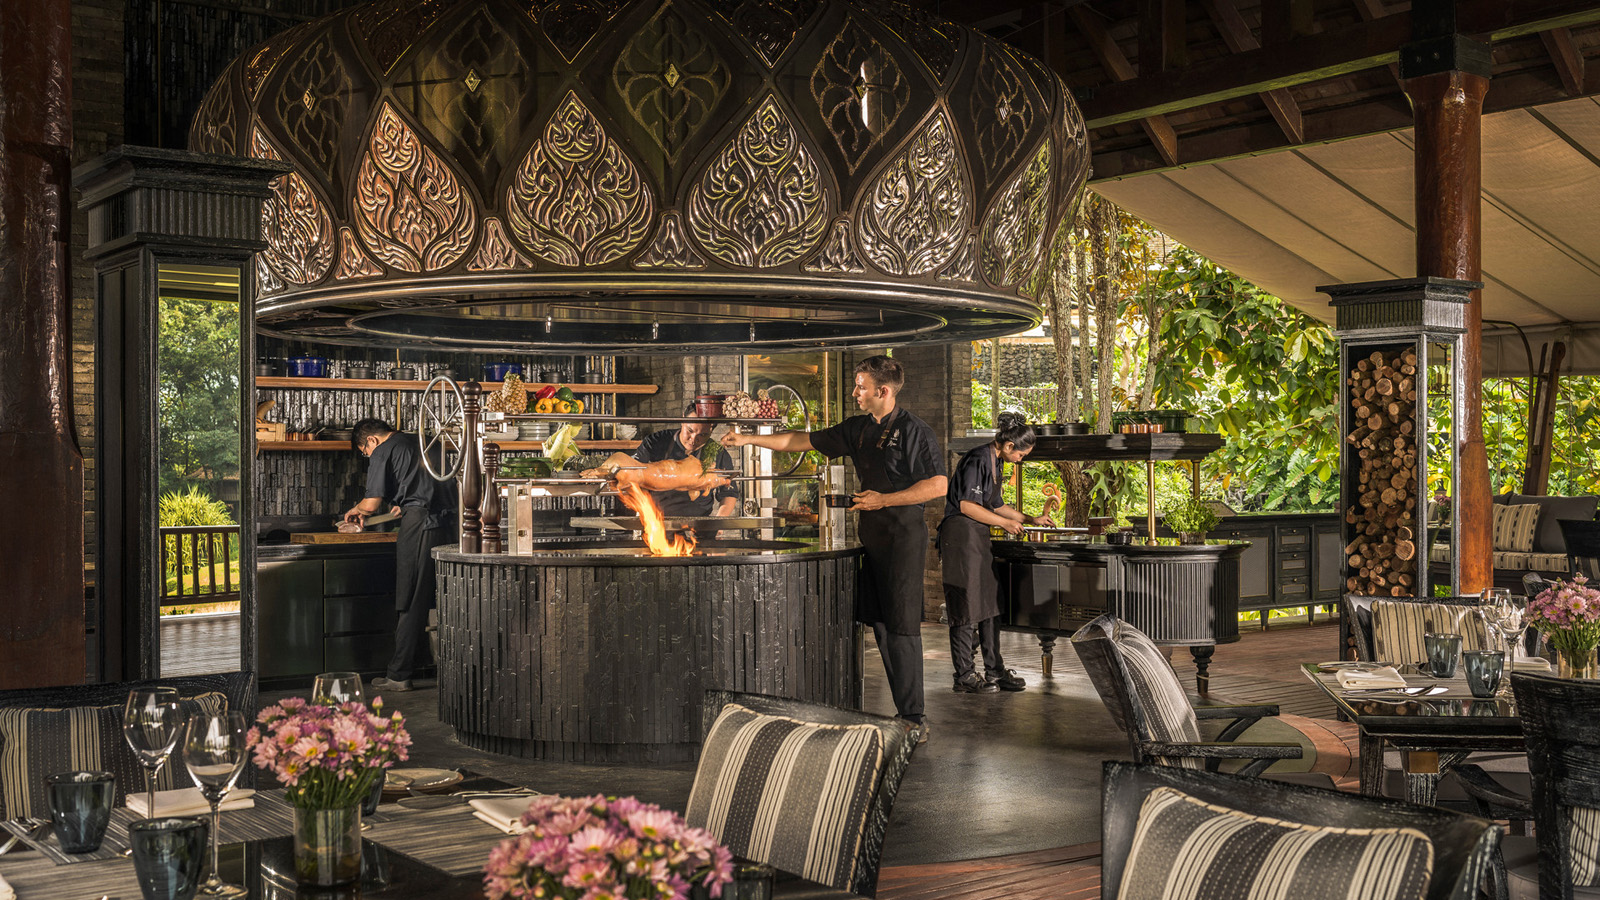 INTRODUCING CHAR BY FOUR SEASONS: A NEW DINING EXPERIENCE AT FOUR SEASONS RESORT CHIANG MAI